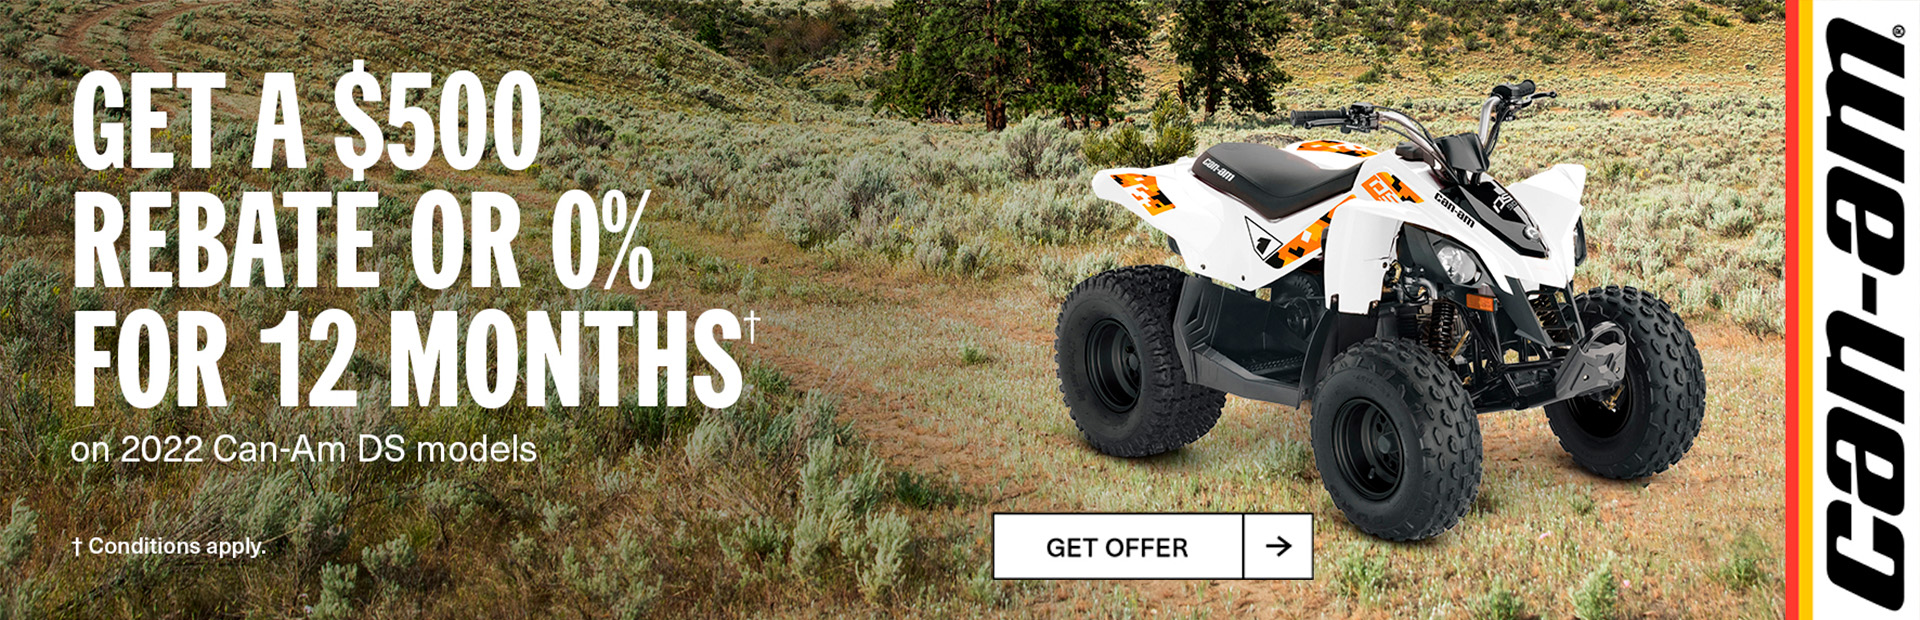 Can am Off Road - Retail Promotion at Edwards Motorsports & RVs